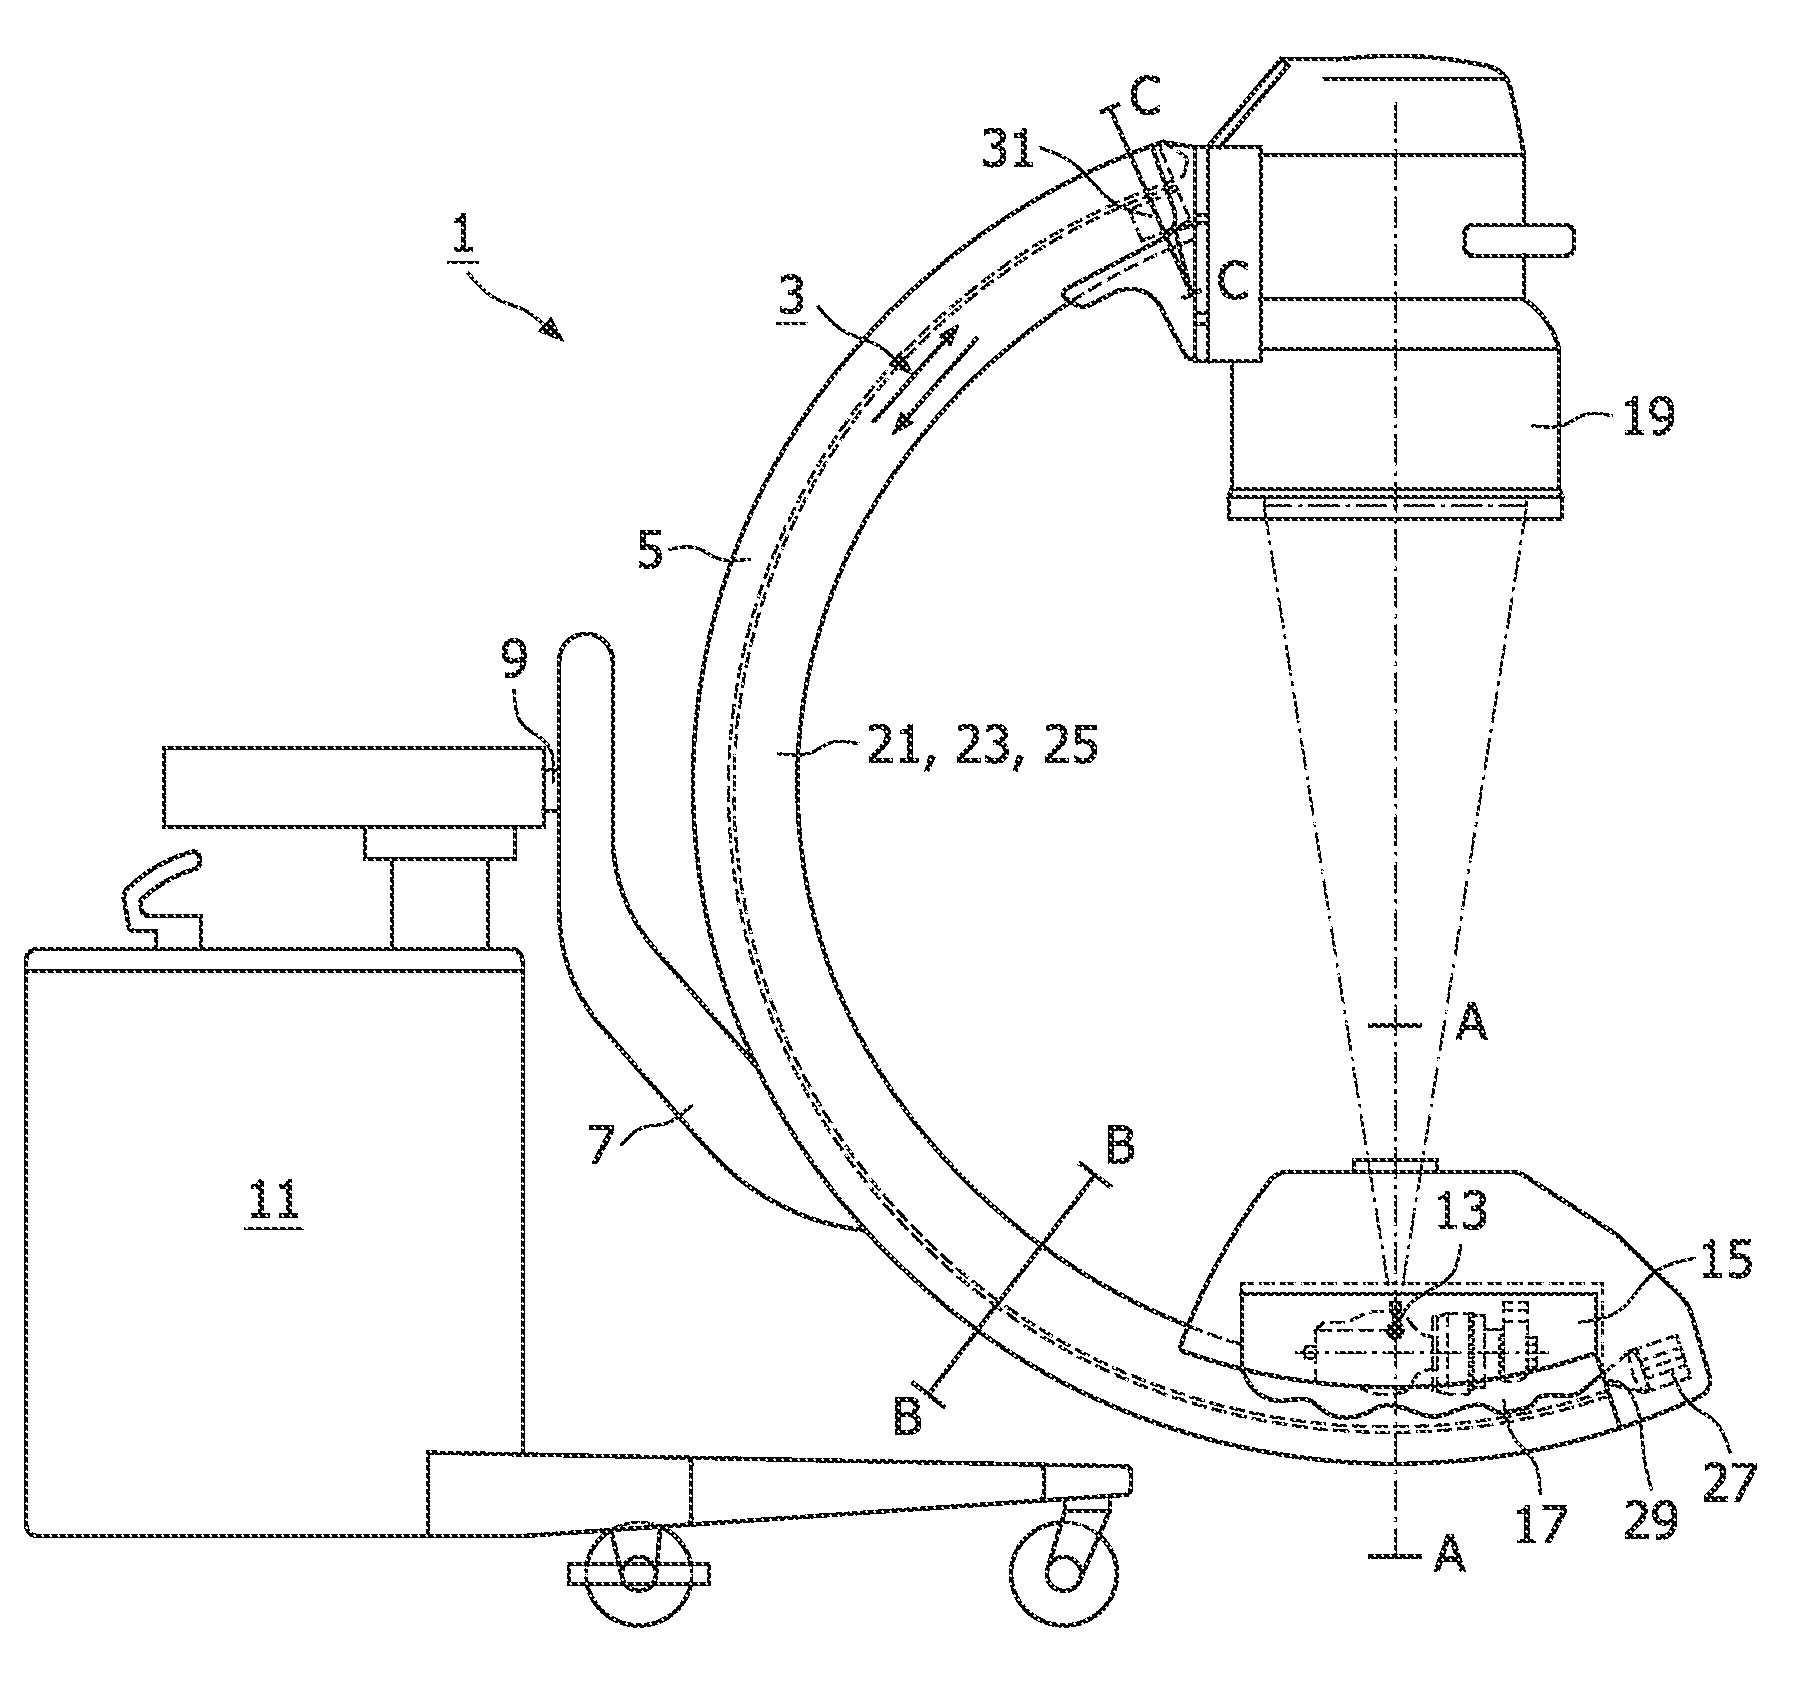 Medical diagnostic x-ray apparatus provided with a cooling device